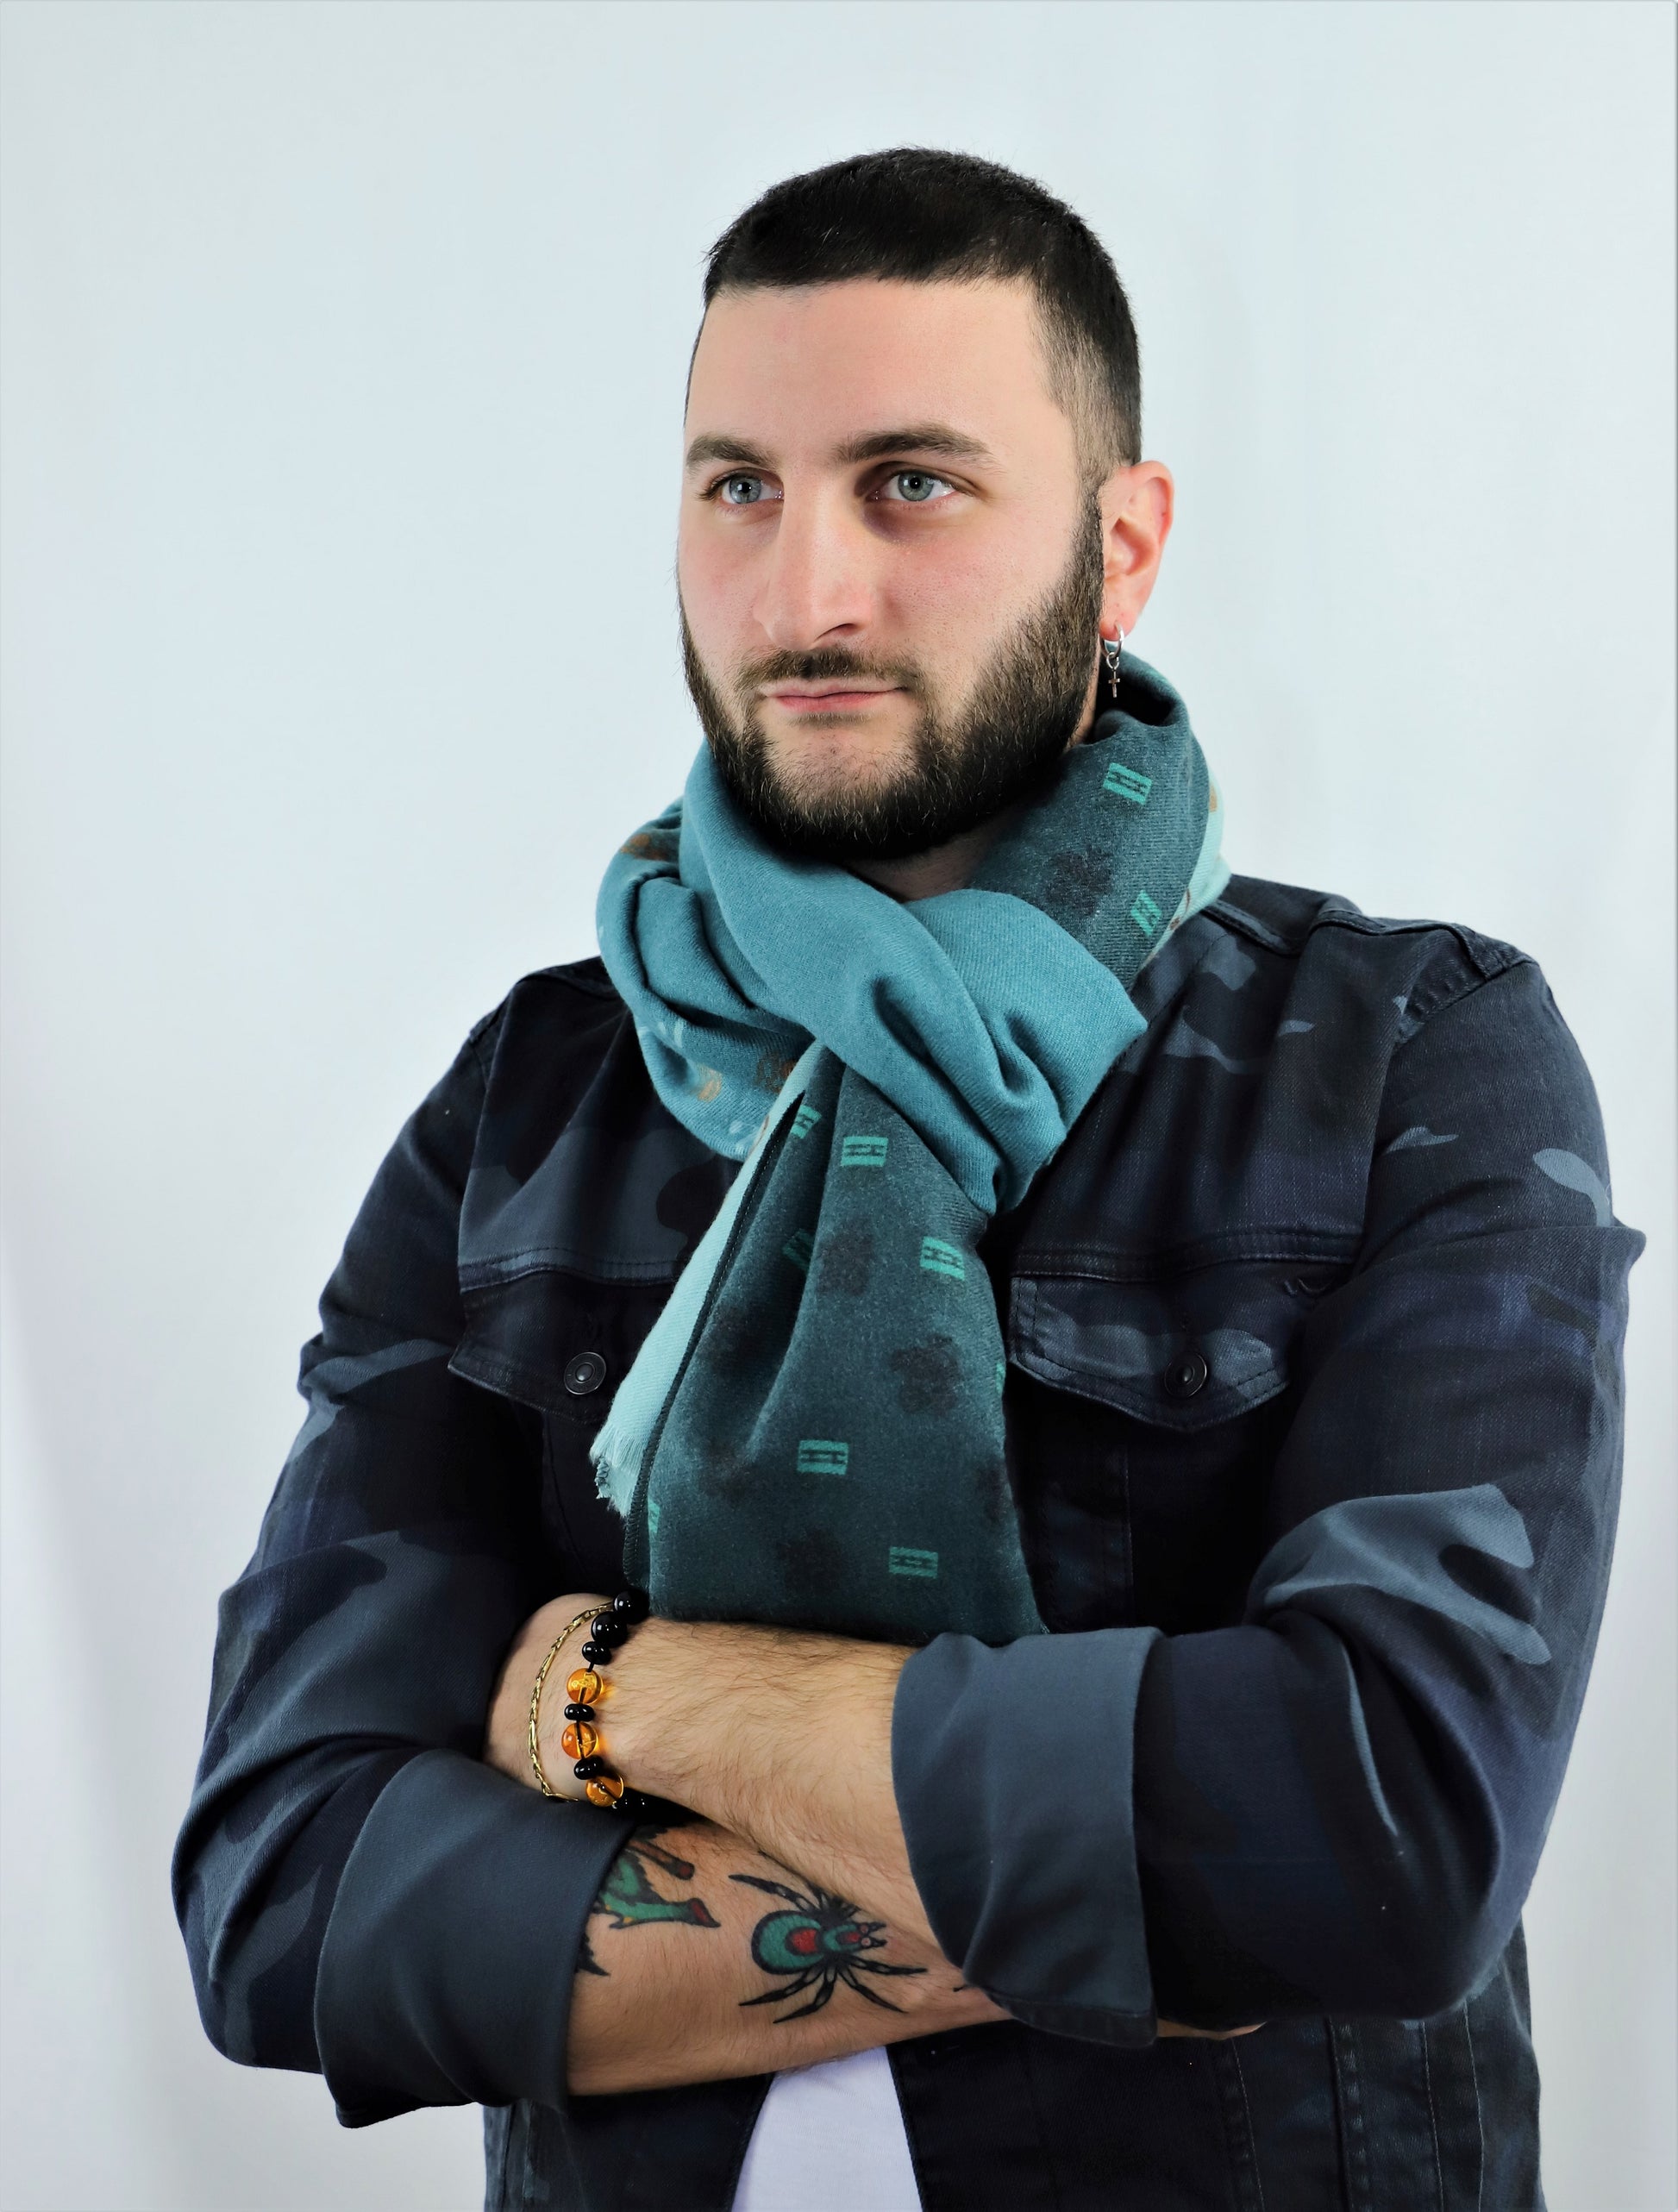 This is a soft and warm cotton scarf for men and for women with unique patterns of headphones, camera and vinyl disc in three shades of green and brown made from a special cotton blend that gives you a wonderful cashmere-like feeling without hurting animals. This is a completely vegan scarf certified by PETA and a perfect gift idea for both men and women.